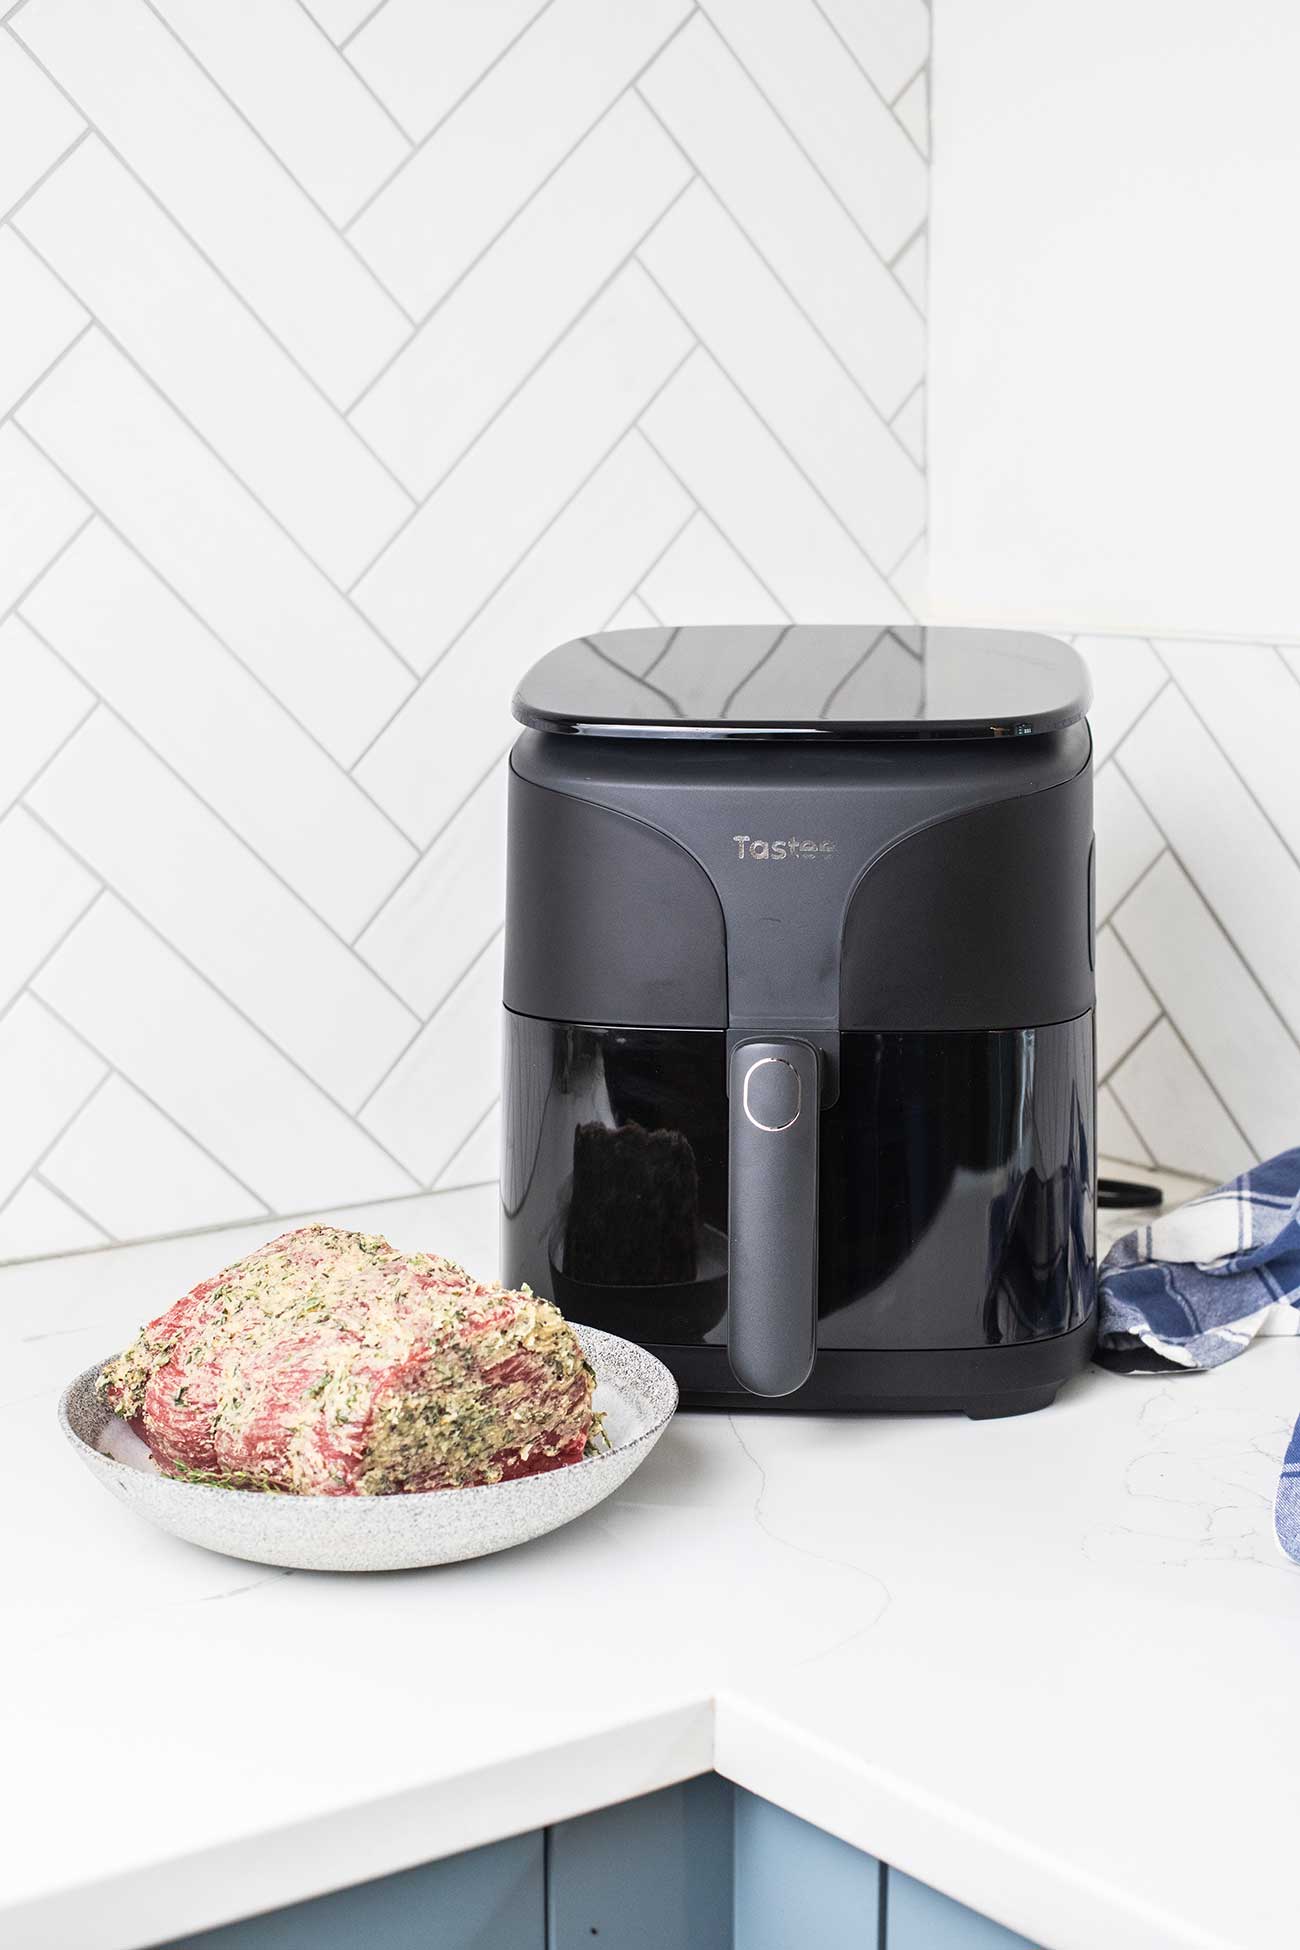 Tastee air fryer shown with a beef roast sitting in front of it.